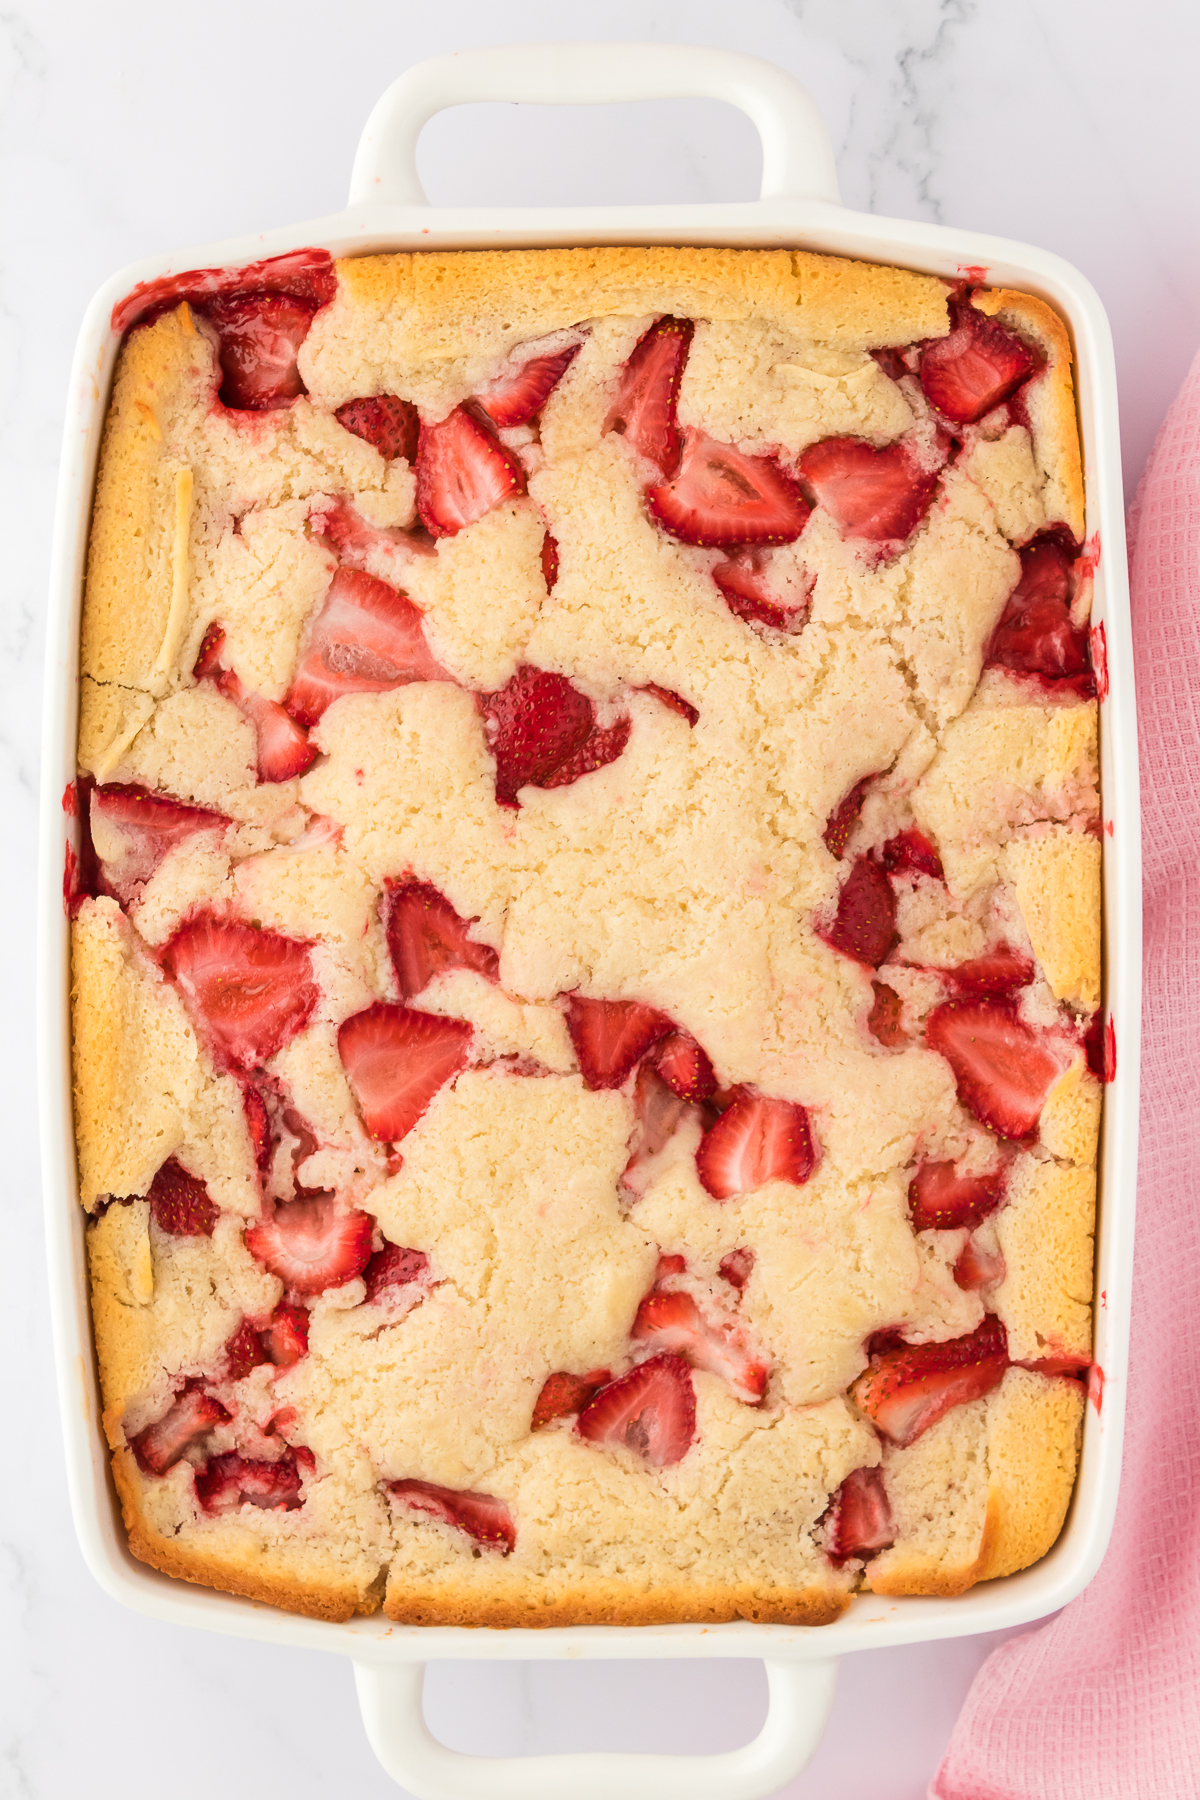 baked strawberry cobbler in 9x13 inch baking dish